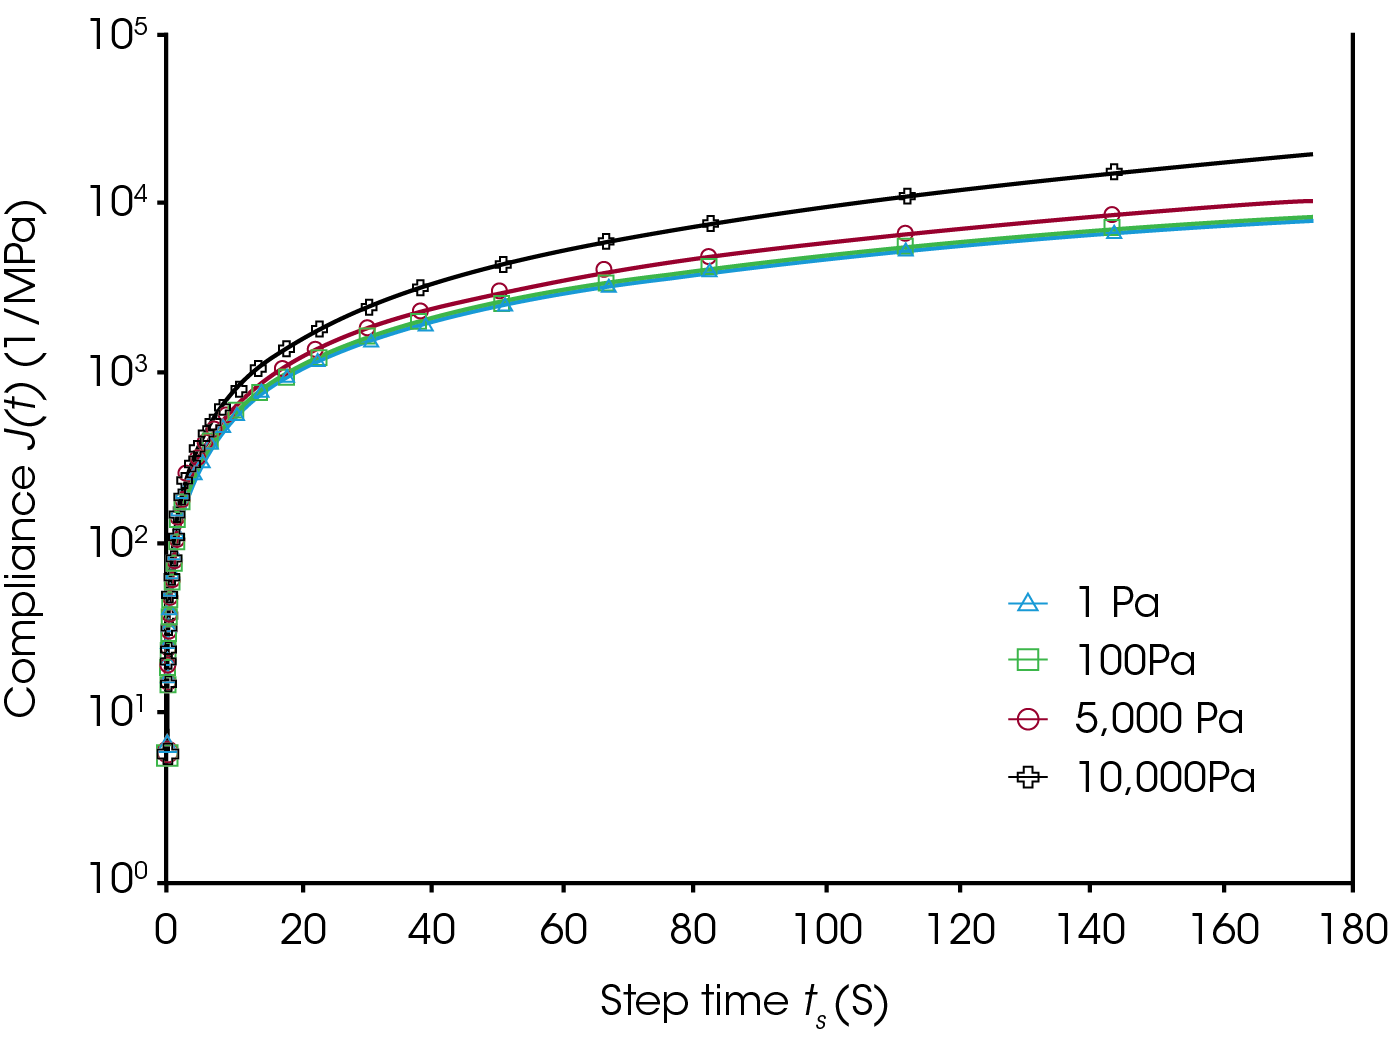 Figure 1. Creep on polydimethylsiloxane (PDMS) at 30 °C. The compliance for the 1 Pa and 100 Pa (blue and green) are indistinguishable. The compliance at 5000 Pa (red) begins to deviate and the compliance of the 10,000 Pa (black) experiment deviates significantly.